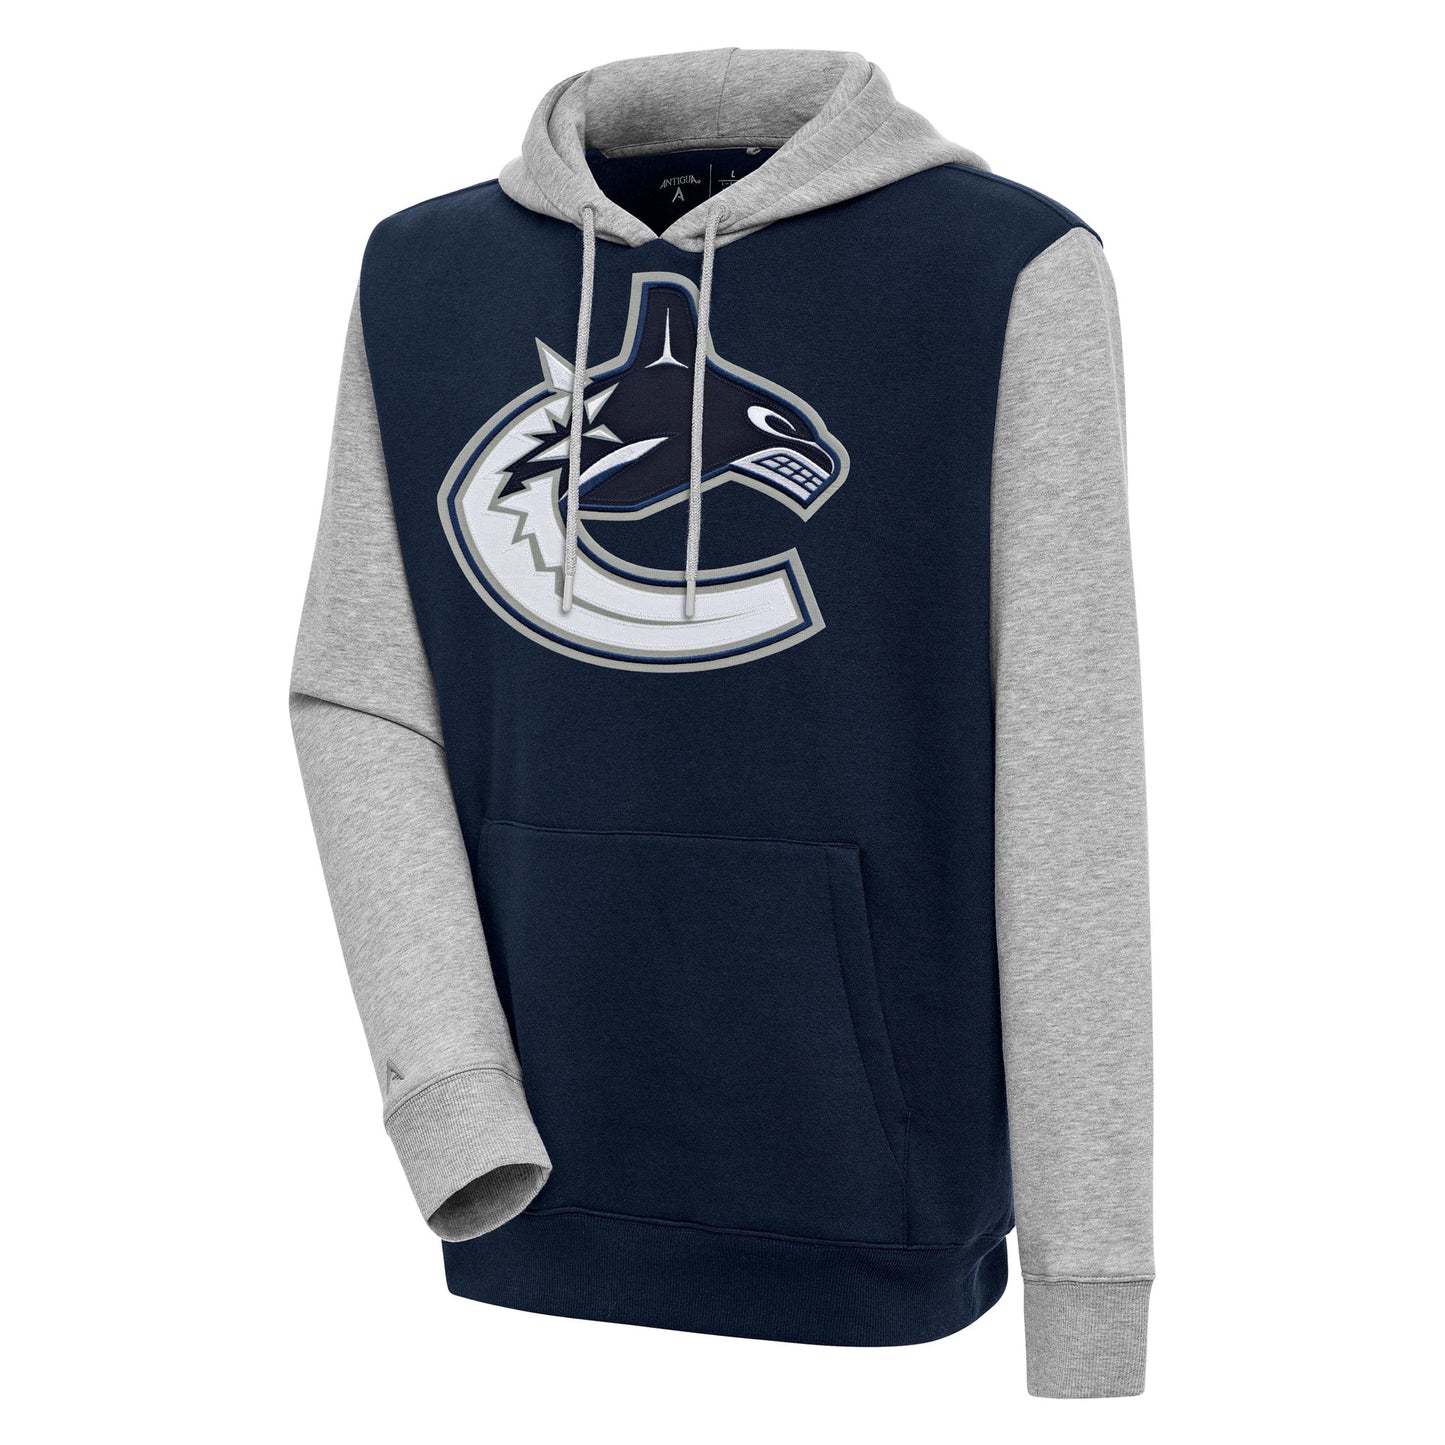 Men's Antigua  Navy/Heather Gray Vancouver Canucks Victory Colorblock Pullover Hoodie